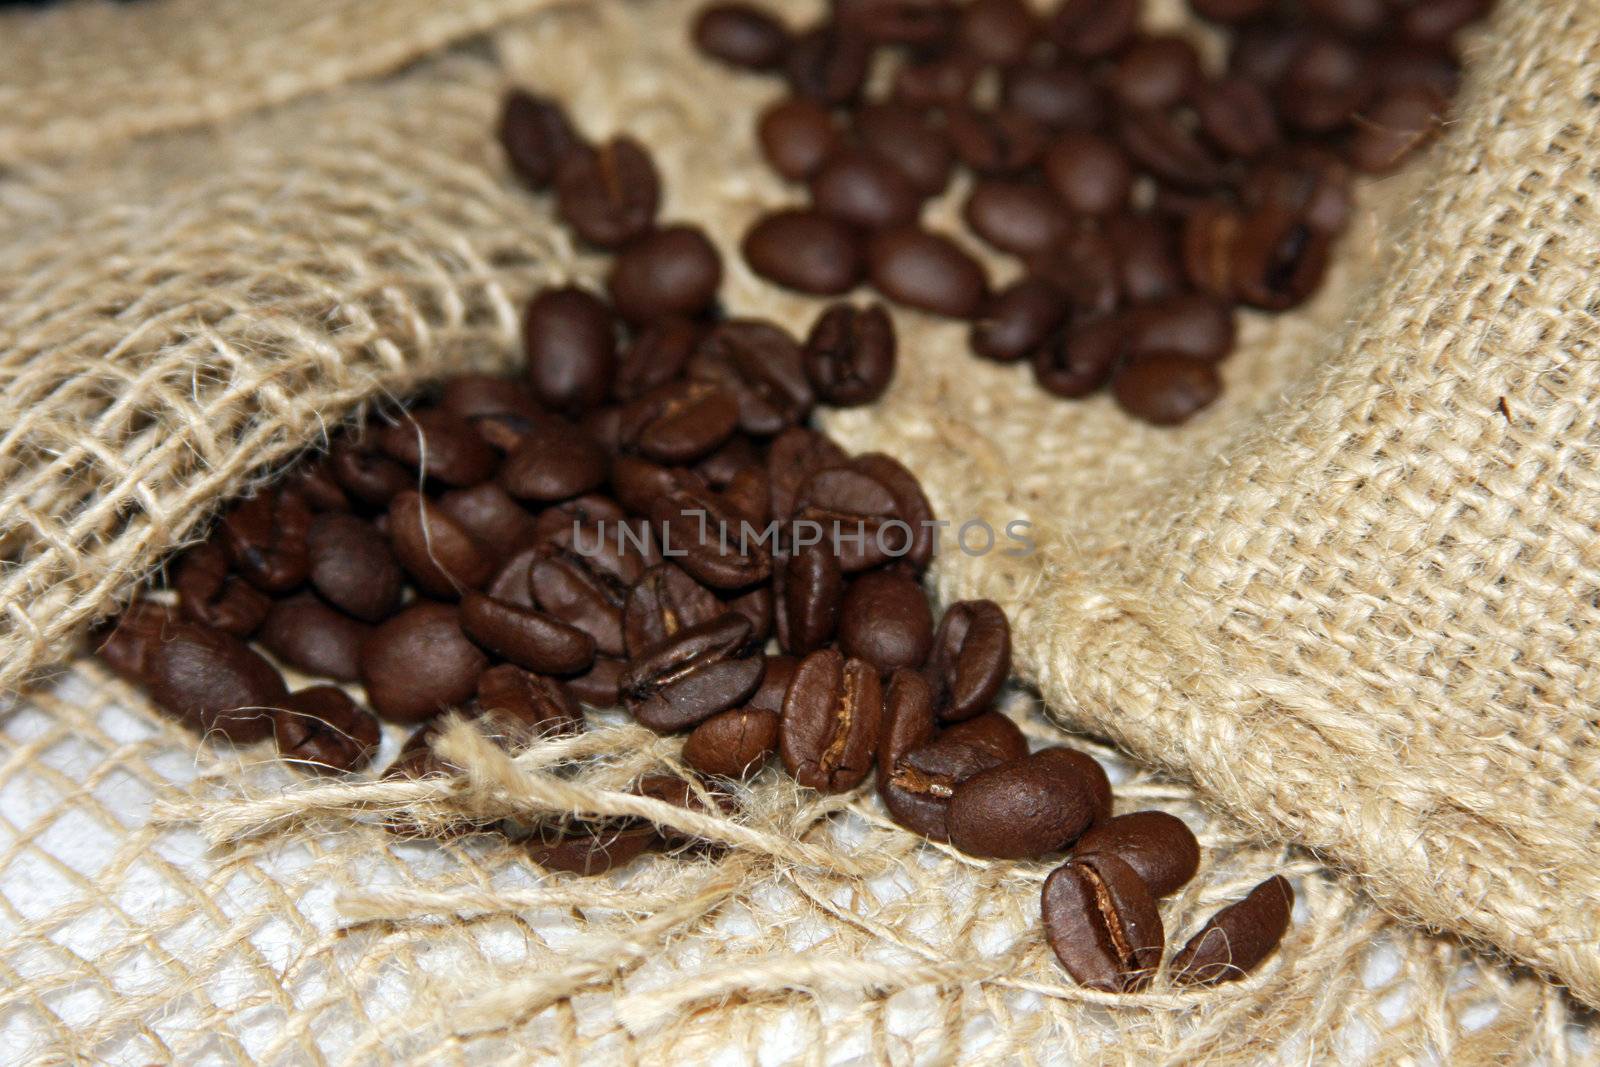 Burap sack with coffee beans